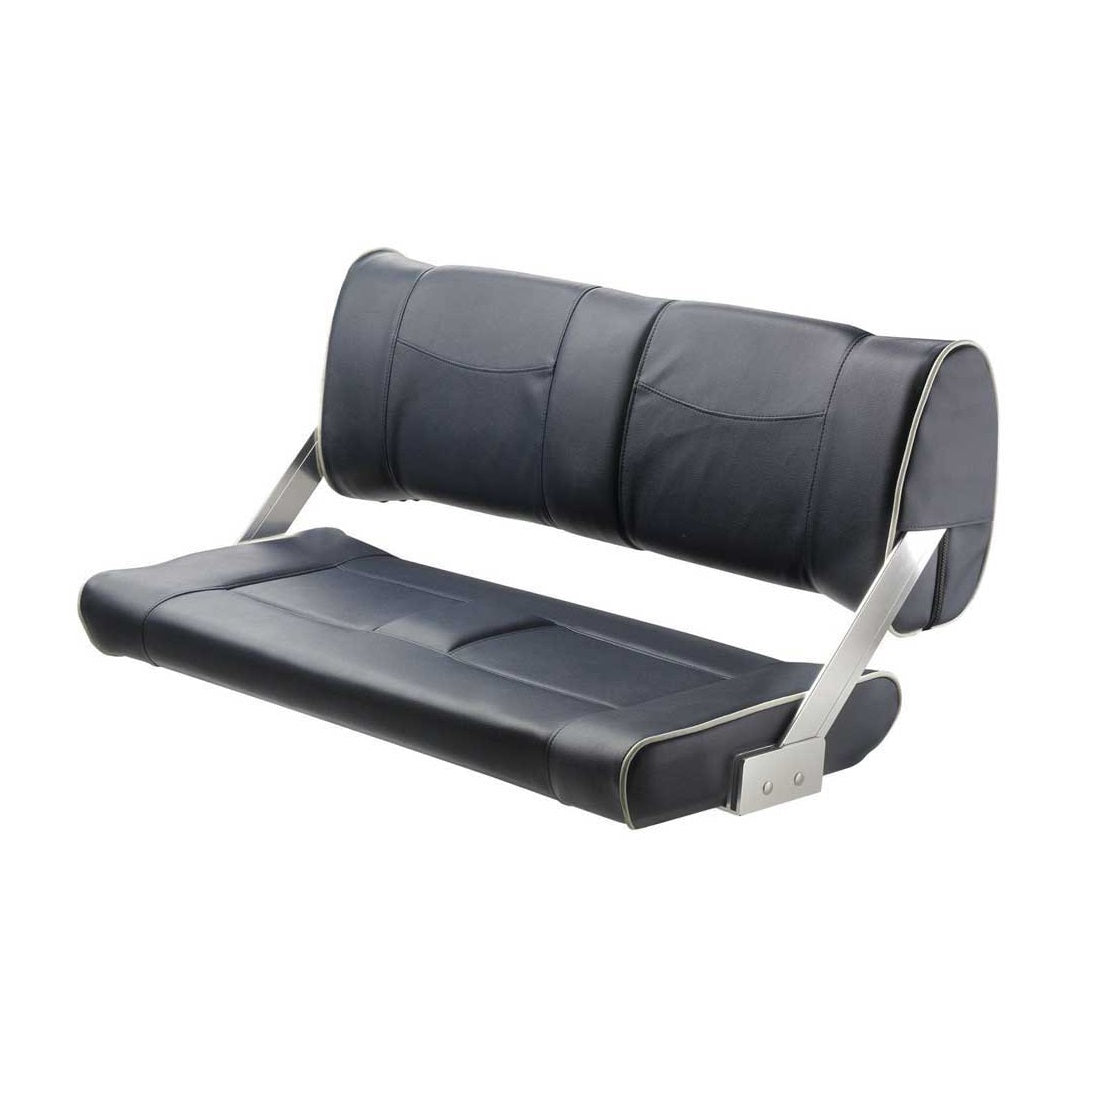 Two Way Flip Back Double Seat 1841905013